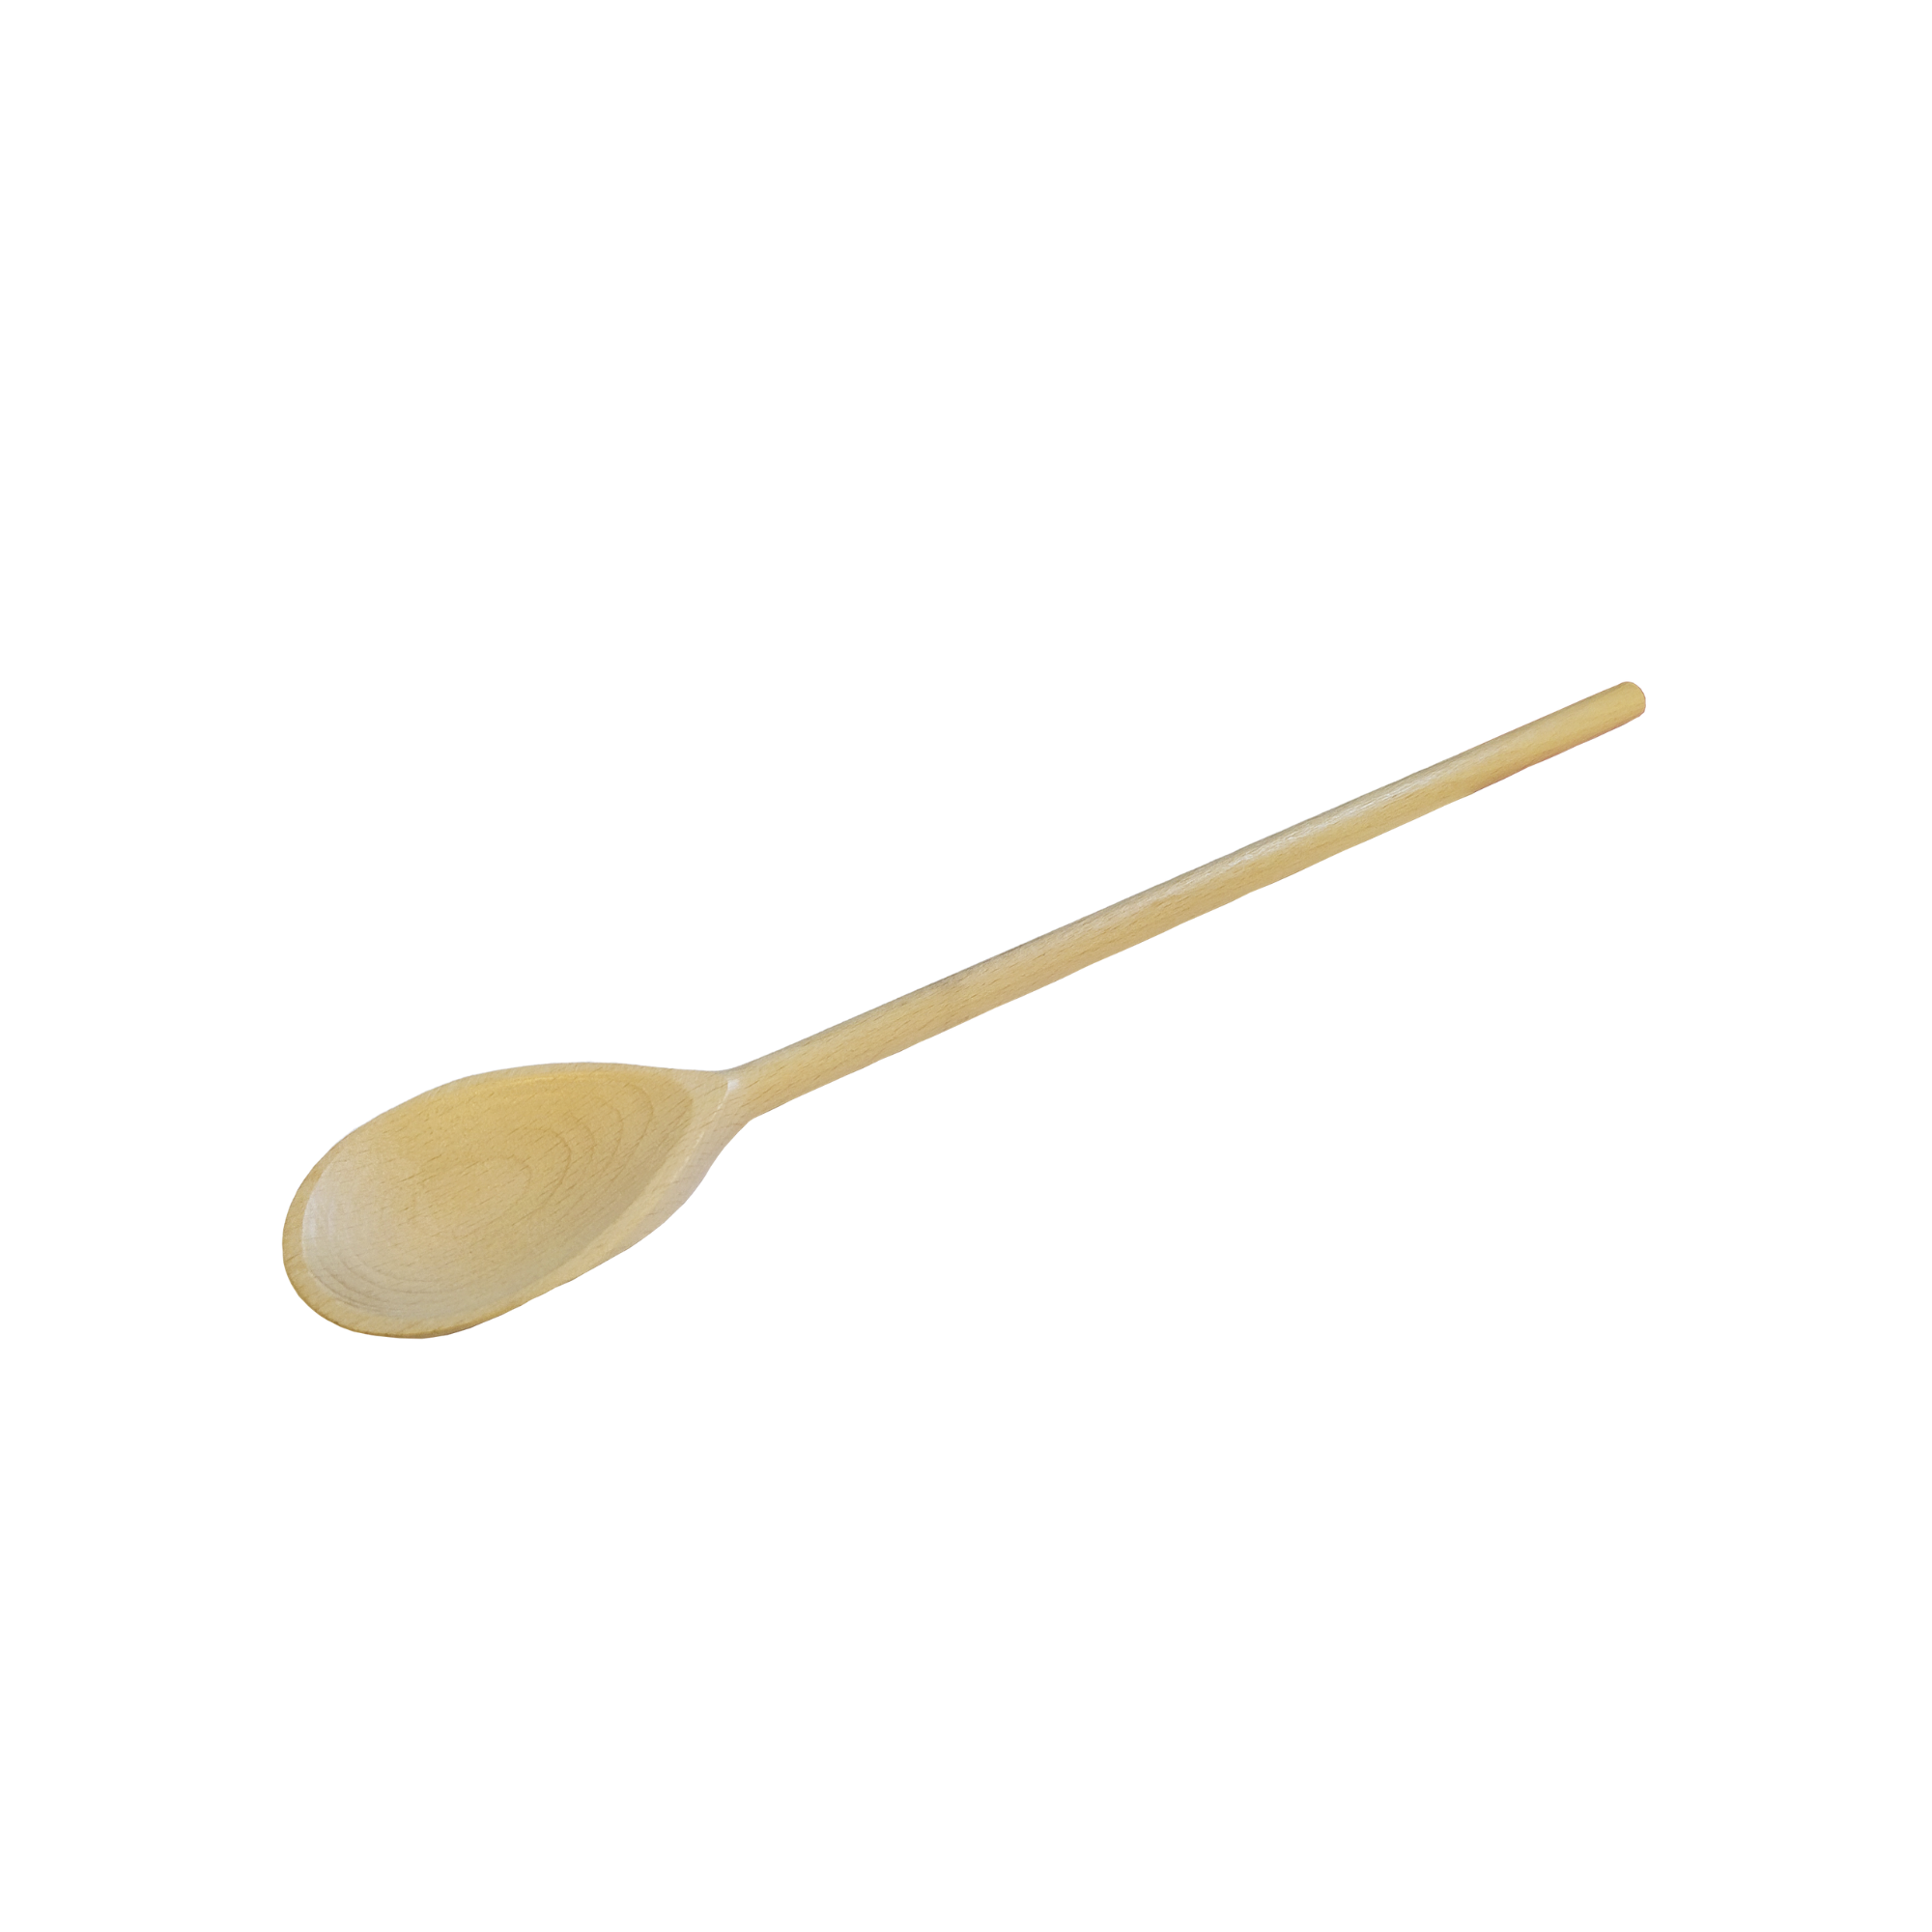 Cooking Spoon in Wood 40 cm Made in France Roger Orfevre Canada Clementine Boutique Toronto